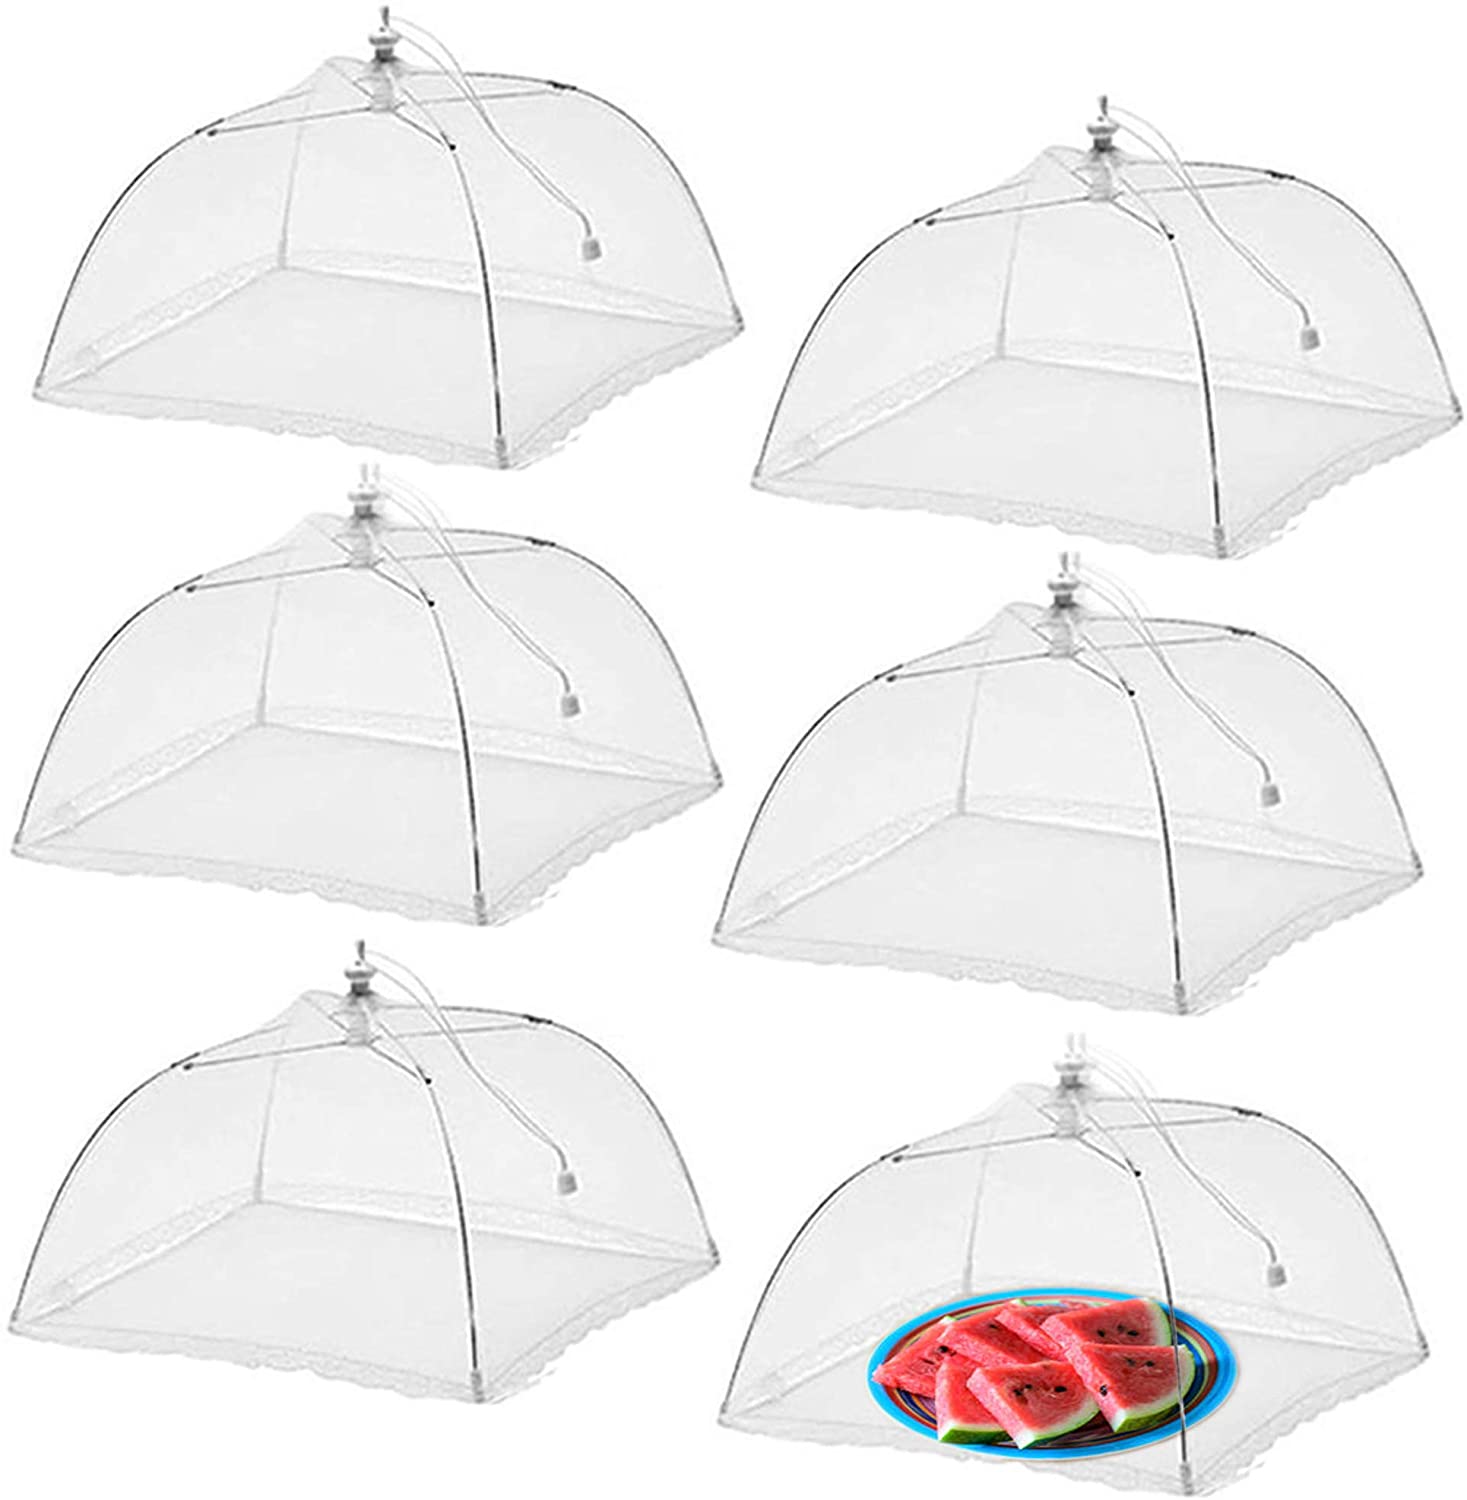 Simply Genius Clear Zero-Waste Outdoor Food Covers, 6-Pack